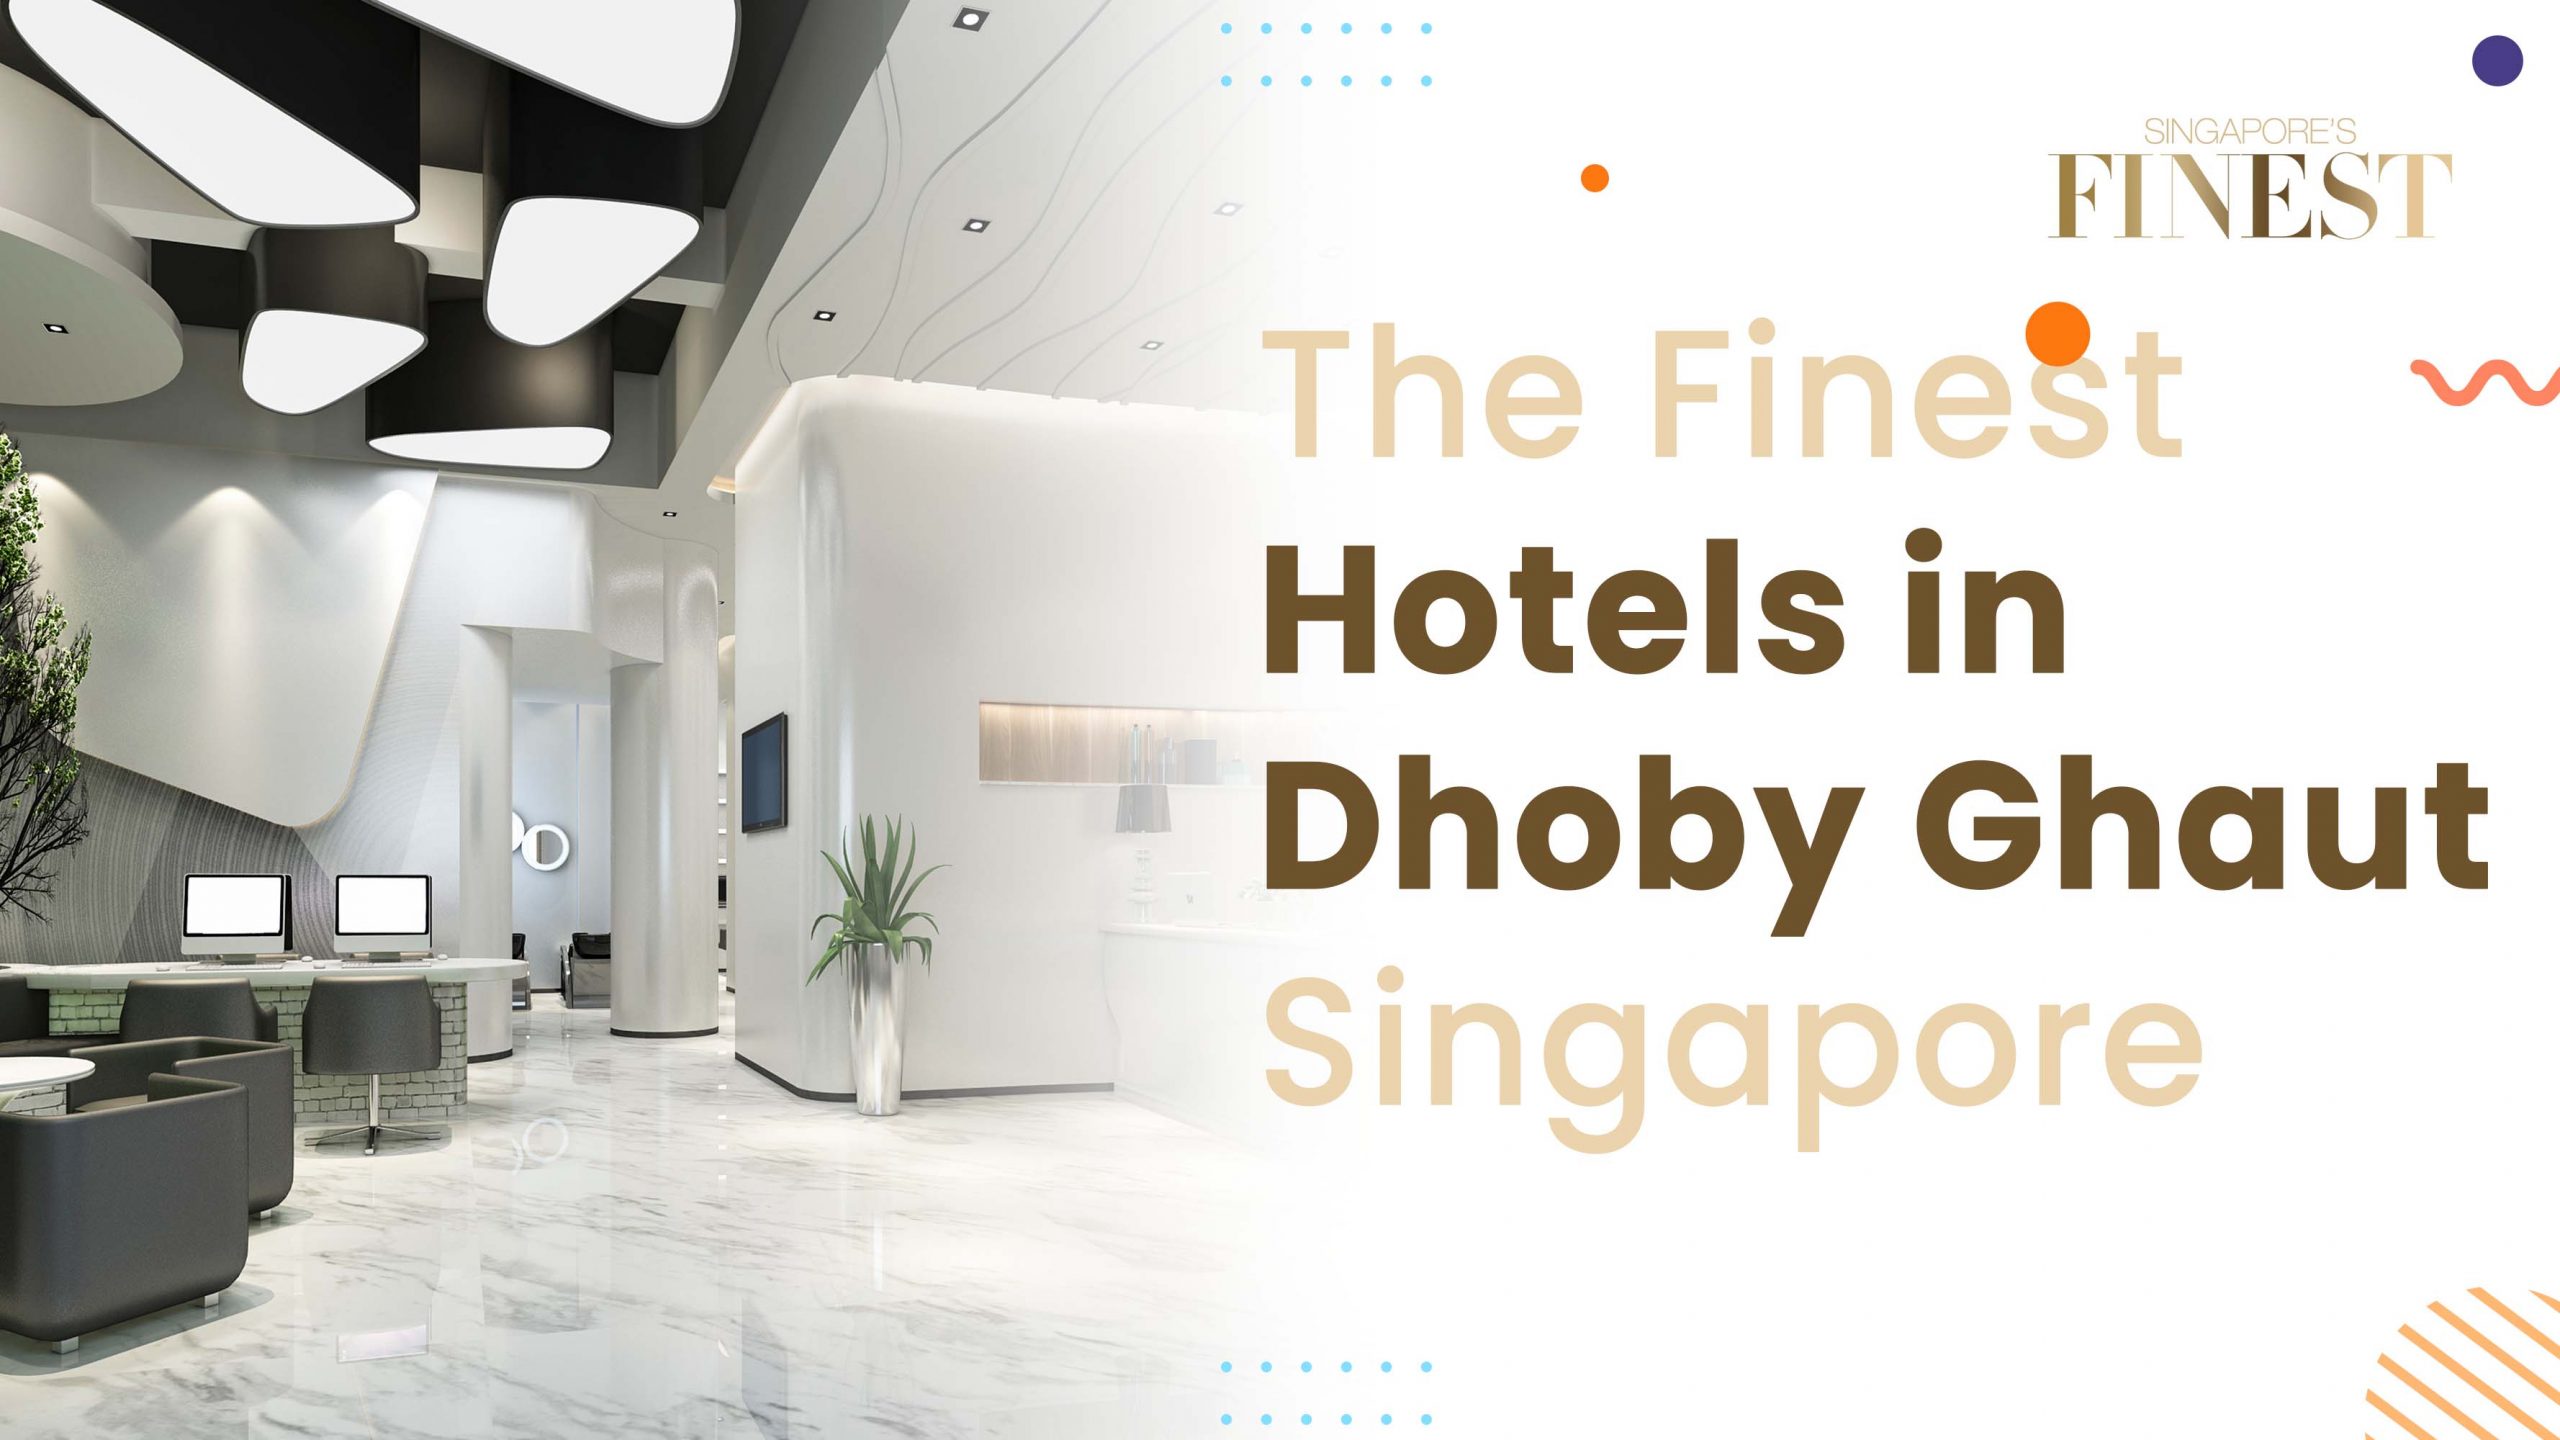 Hotels in Dhoby Ghaut